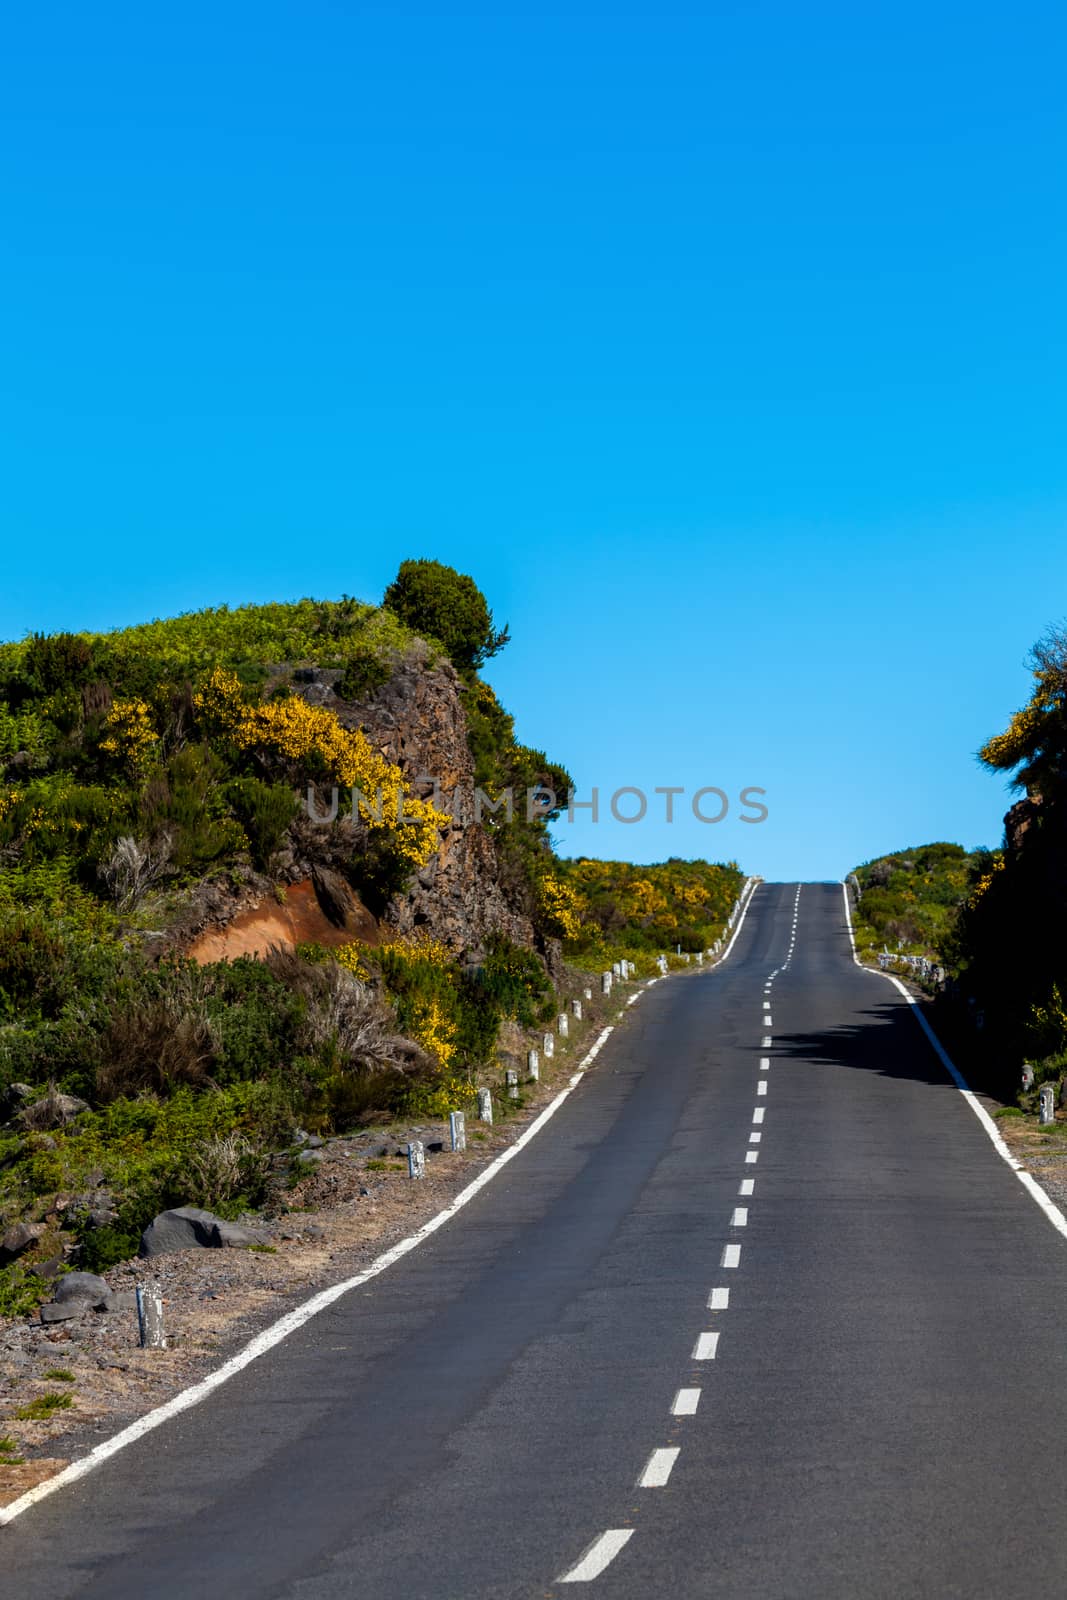 asphalt road through the green field and clouds on blue sky